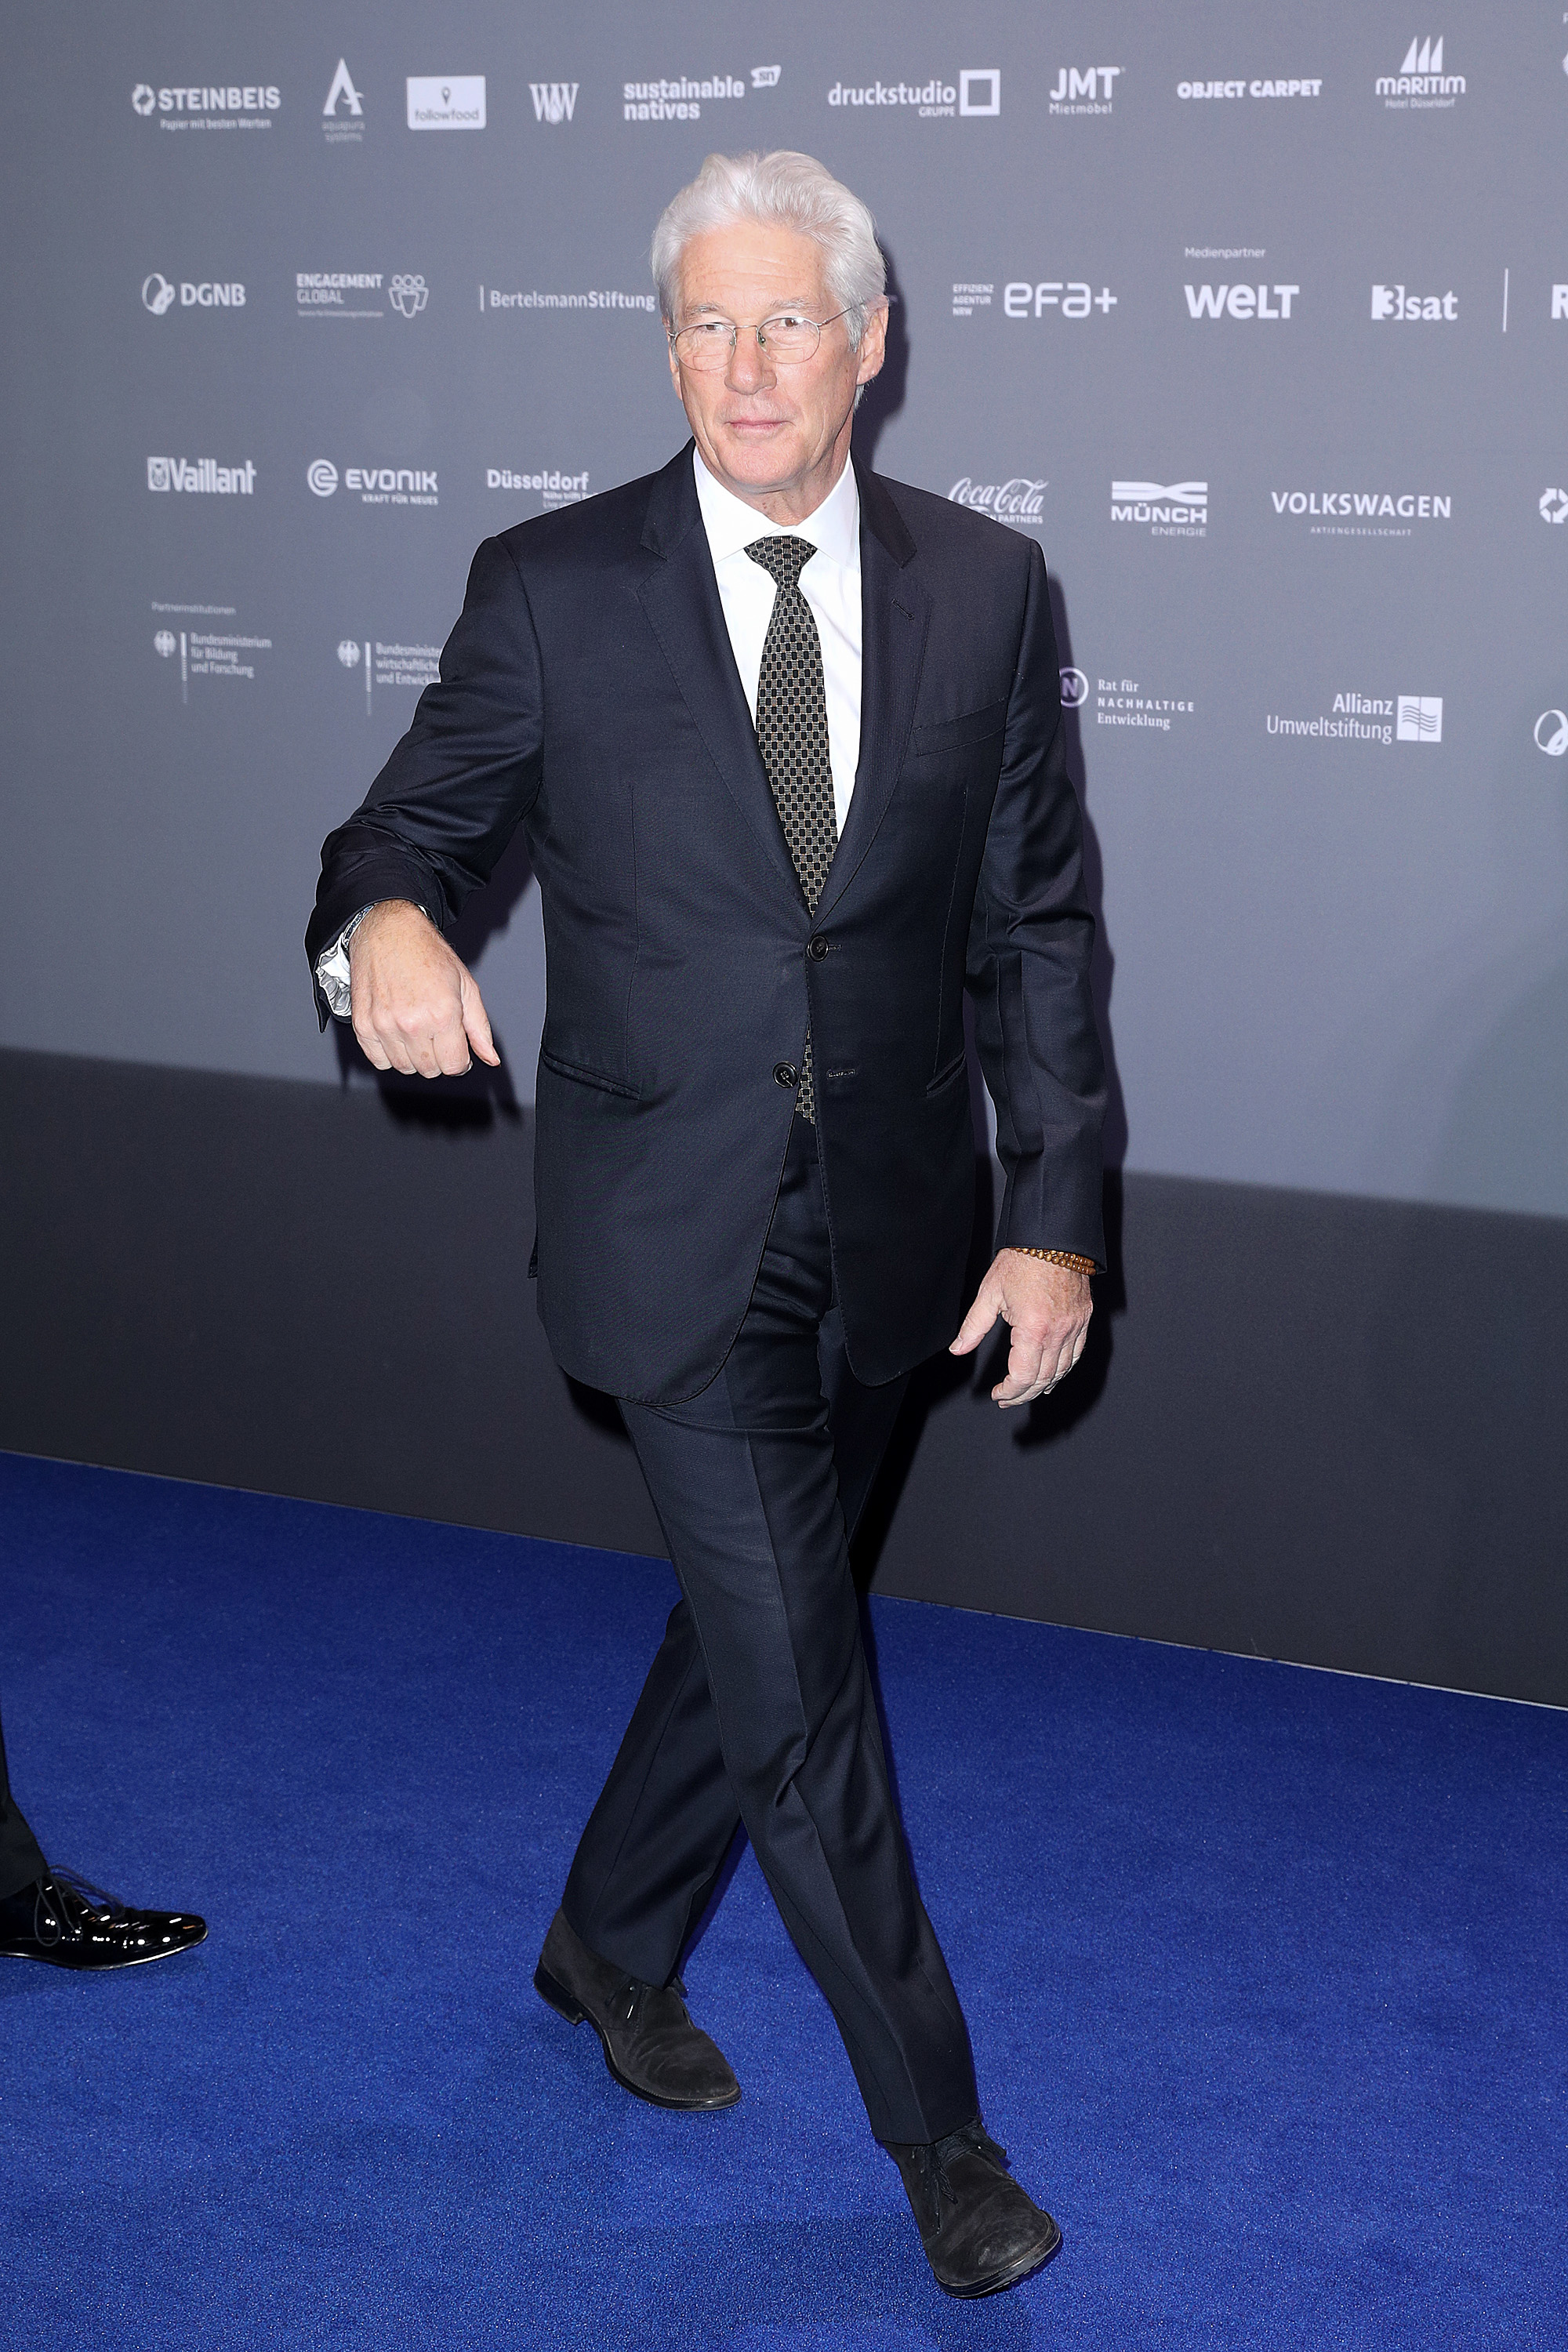 Richard Gere attends the German Sustainability Award at Maritim Hotel in Duesseldorf, Germany, on December 7, 2018. | Source: Getty Images